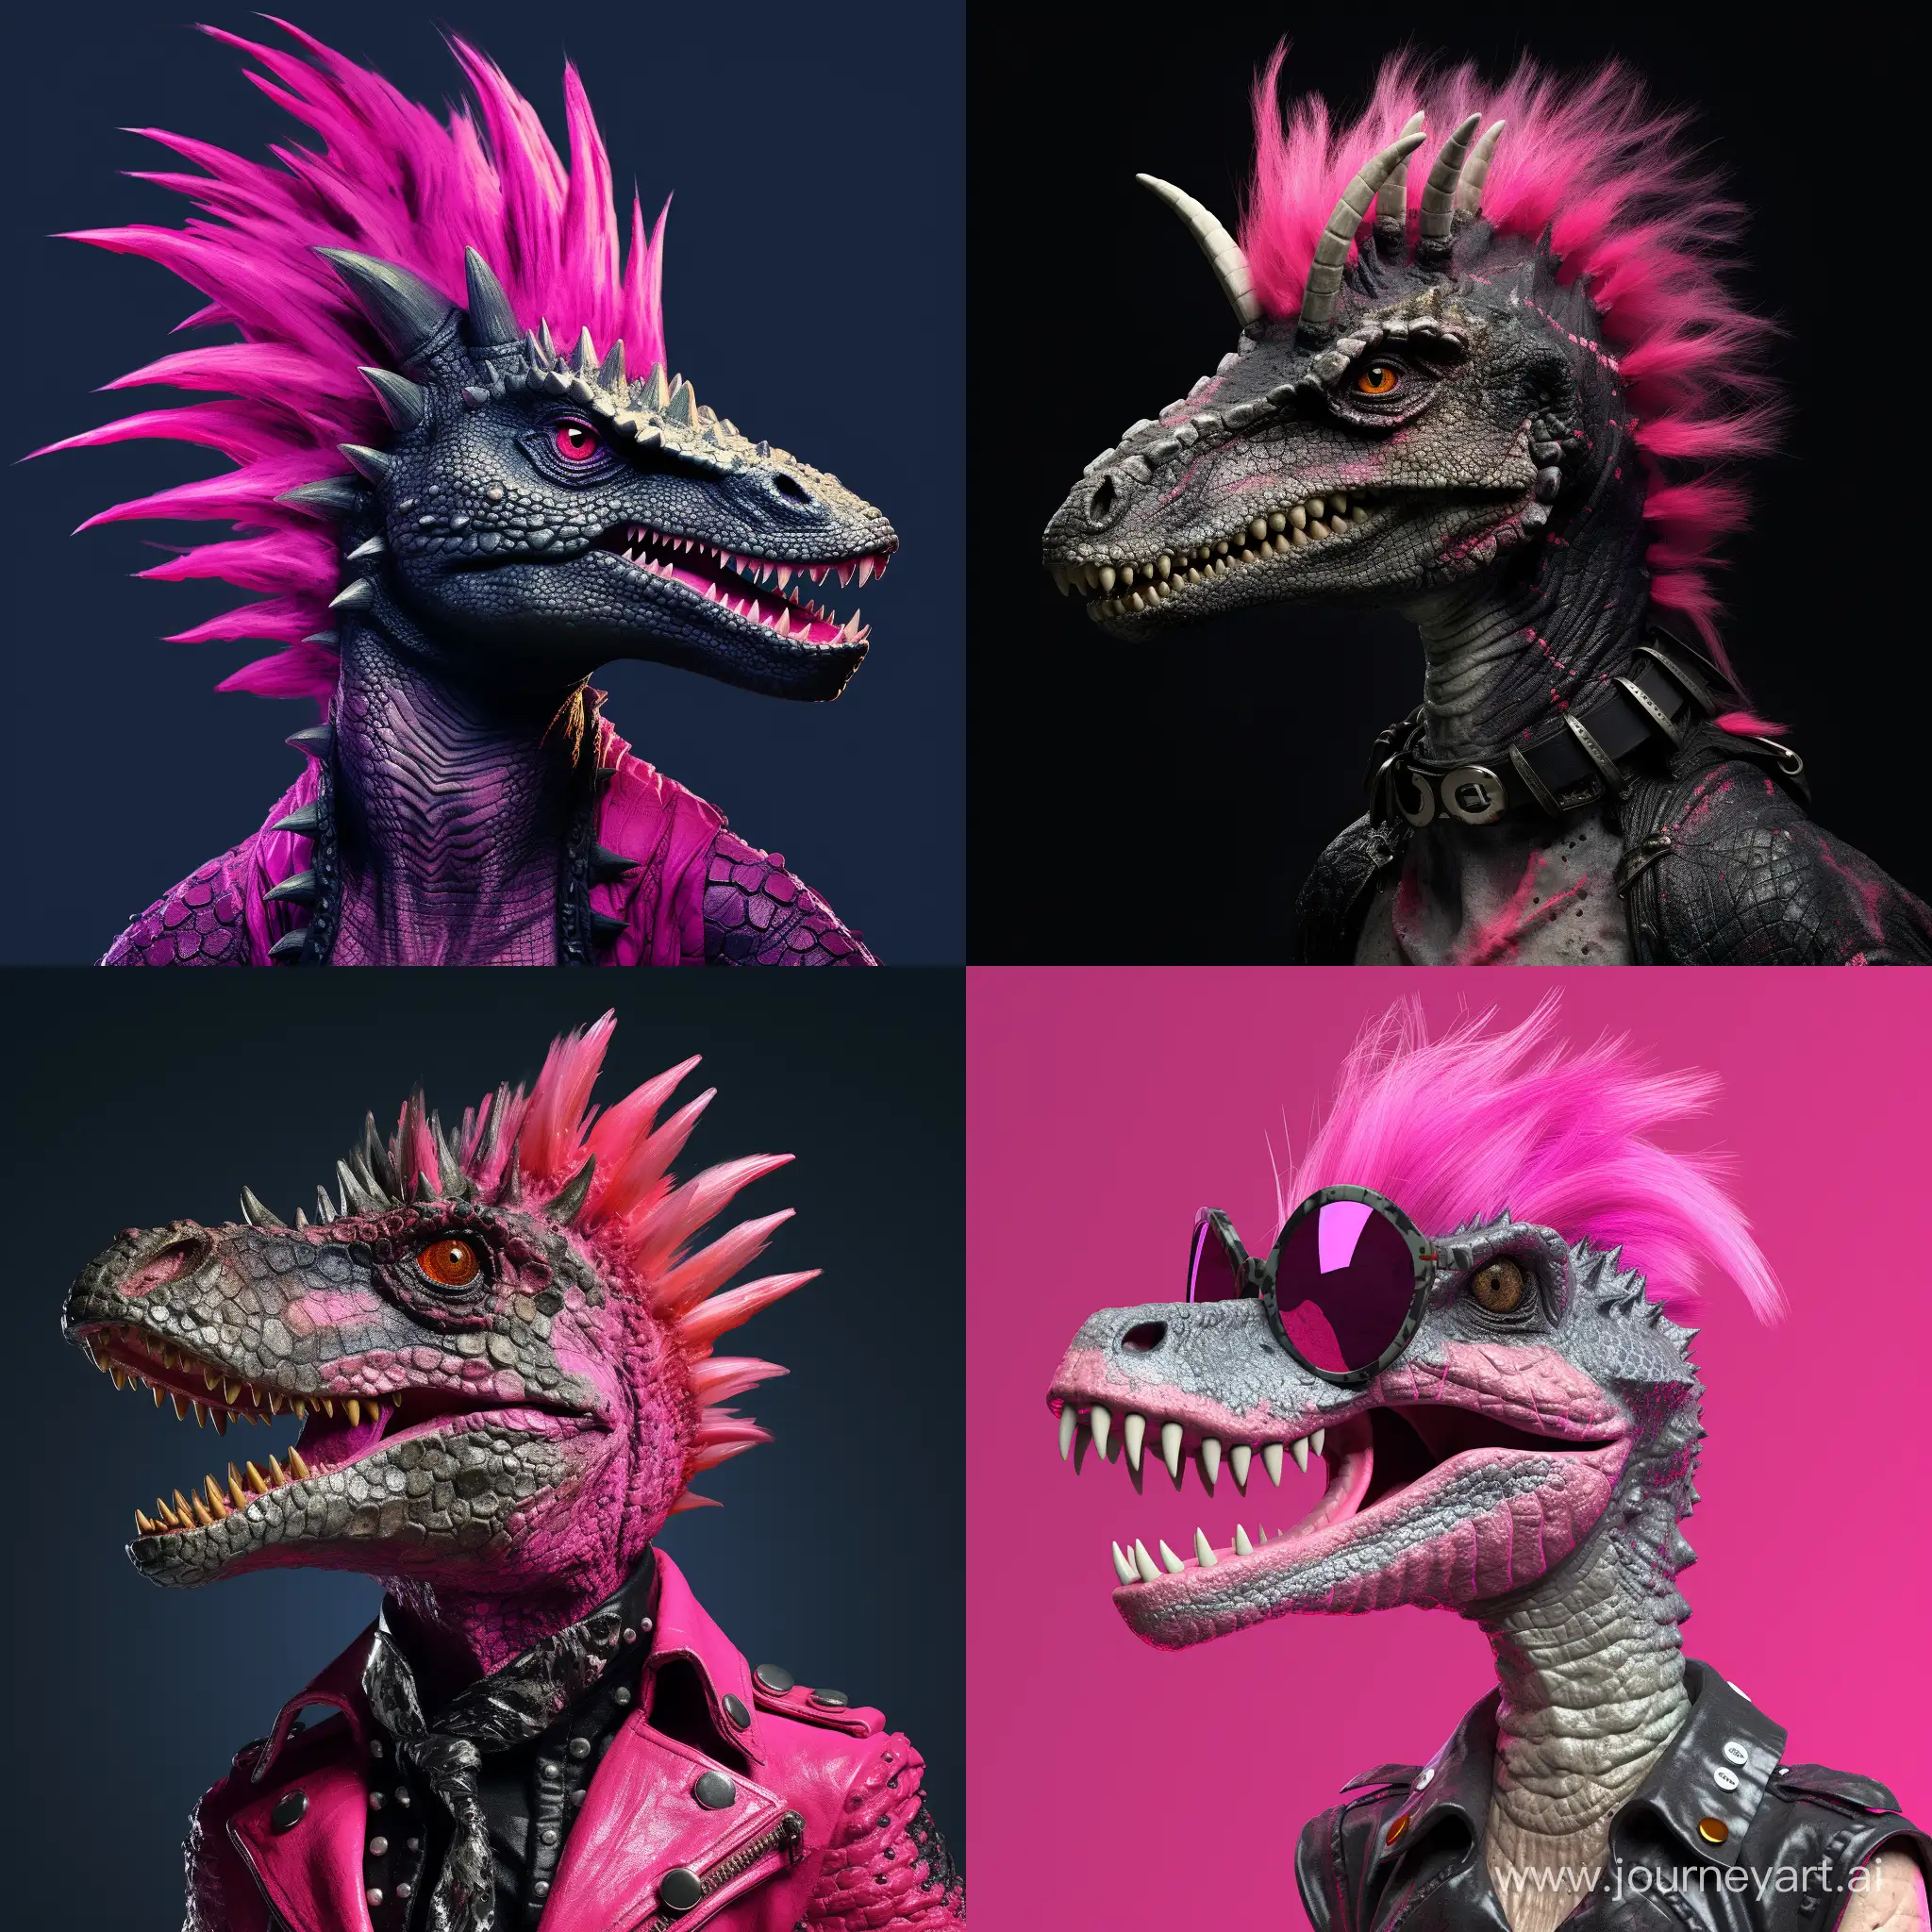 Edgy-Dinosaur-Punk-with-Vibrant-Pink-Spikes